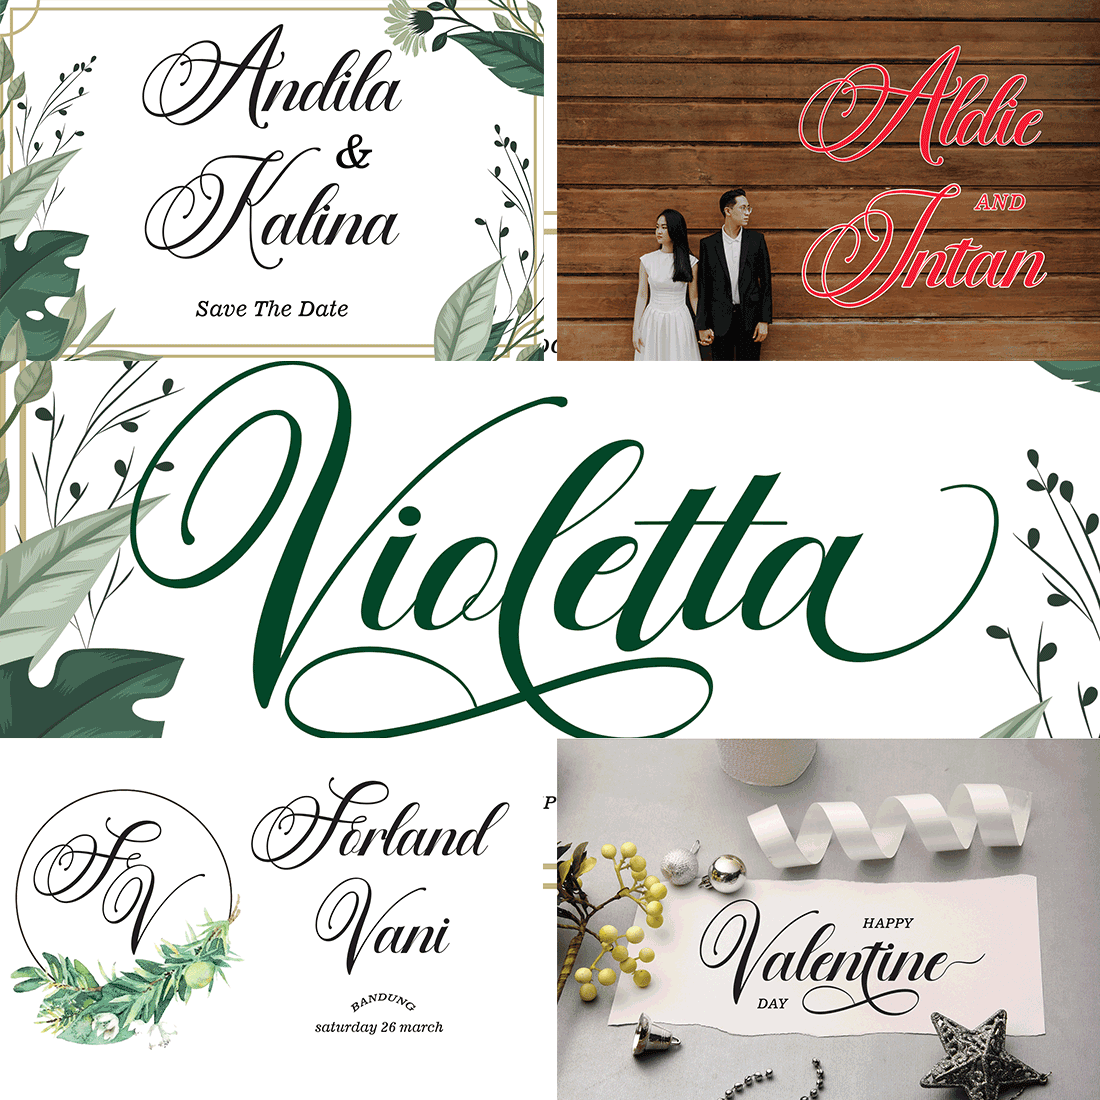 Violetta font is this amazing typeface handmade script font we created in freestyle for those of you who do work and crafts.